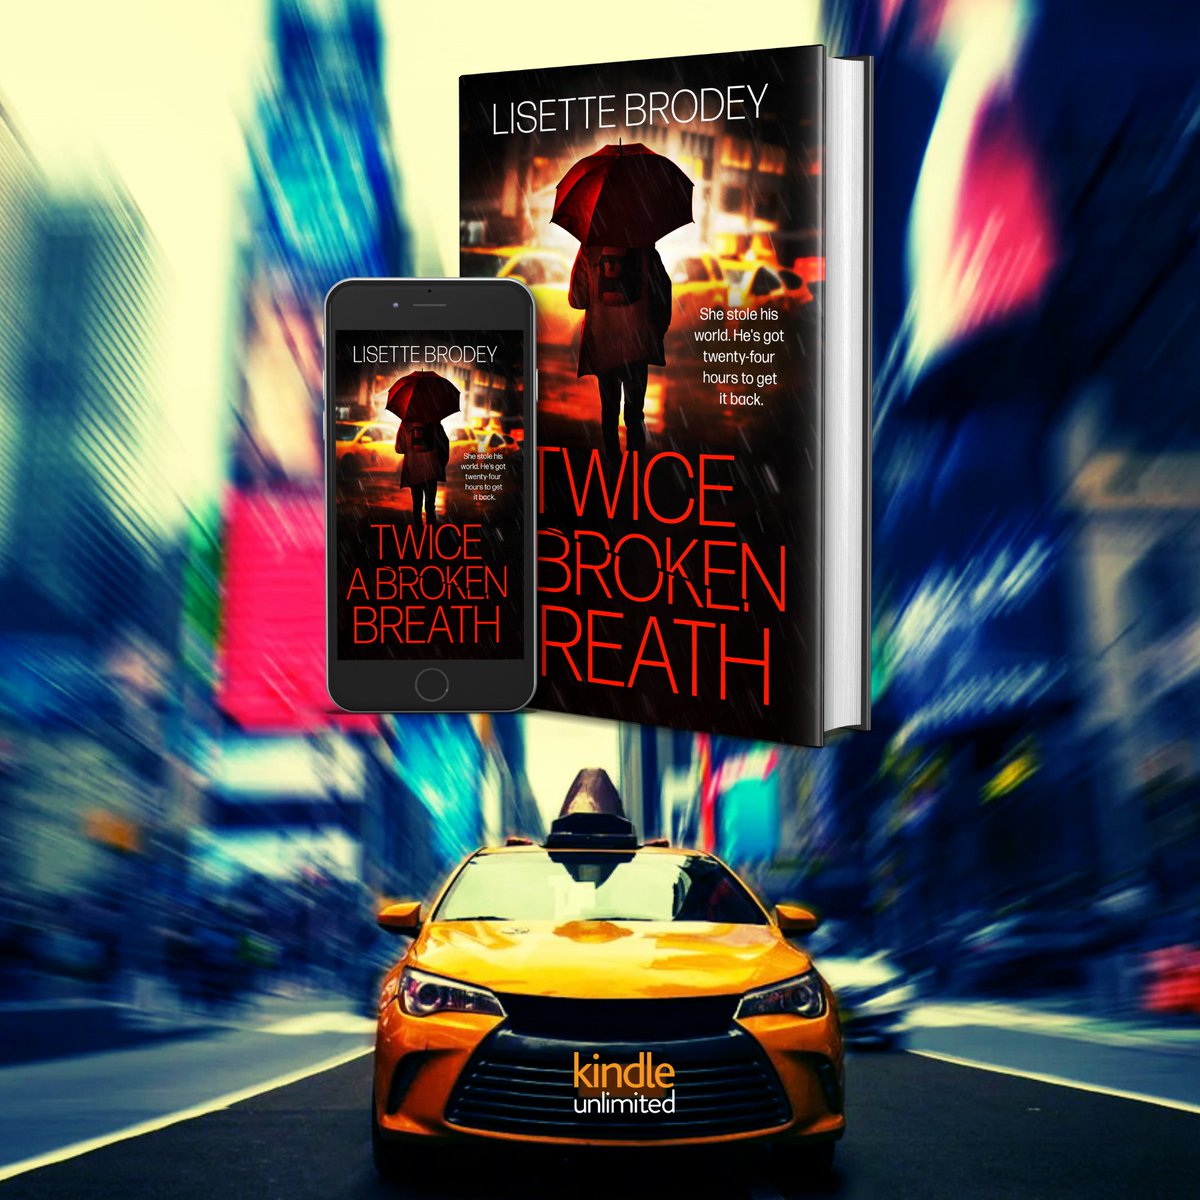 TWICE A BROKEN BREATH 🌆🚖 'I so enjoy a great plot, yet I’m fully engaged only if the story is also character-driven. The author's side characters are impressive, as richly cast as her protagonist.' ☔️💦 mybook.to/TwiceBroken 📕 #NYC 💥 #suspense #KU